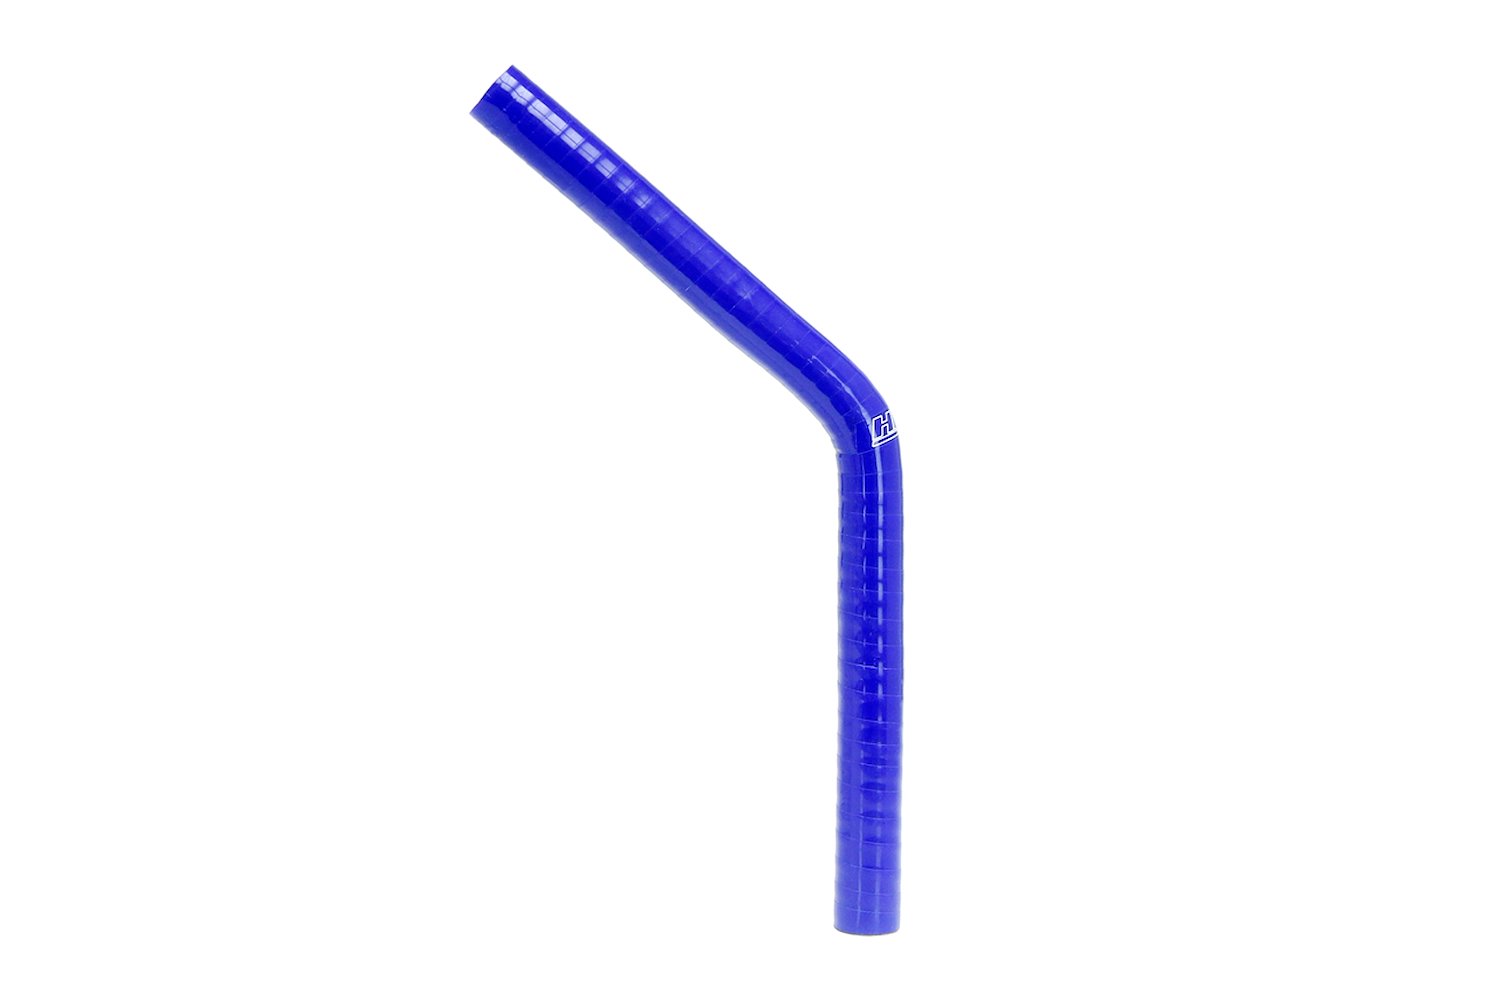 HTSEC45-125-BLUE Silicone 45-Degree Elbow Coupler Hose, High-Temp 4-Ply Reinforced, 1-1/4 in. ID, Blue